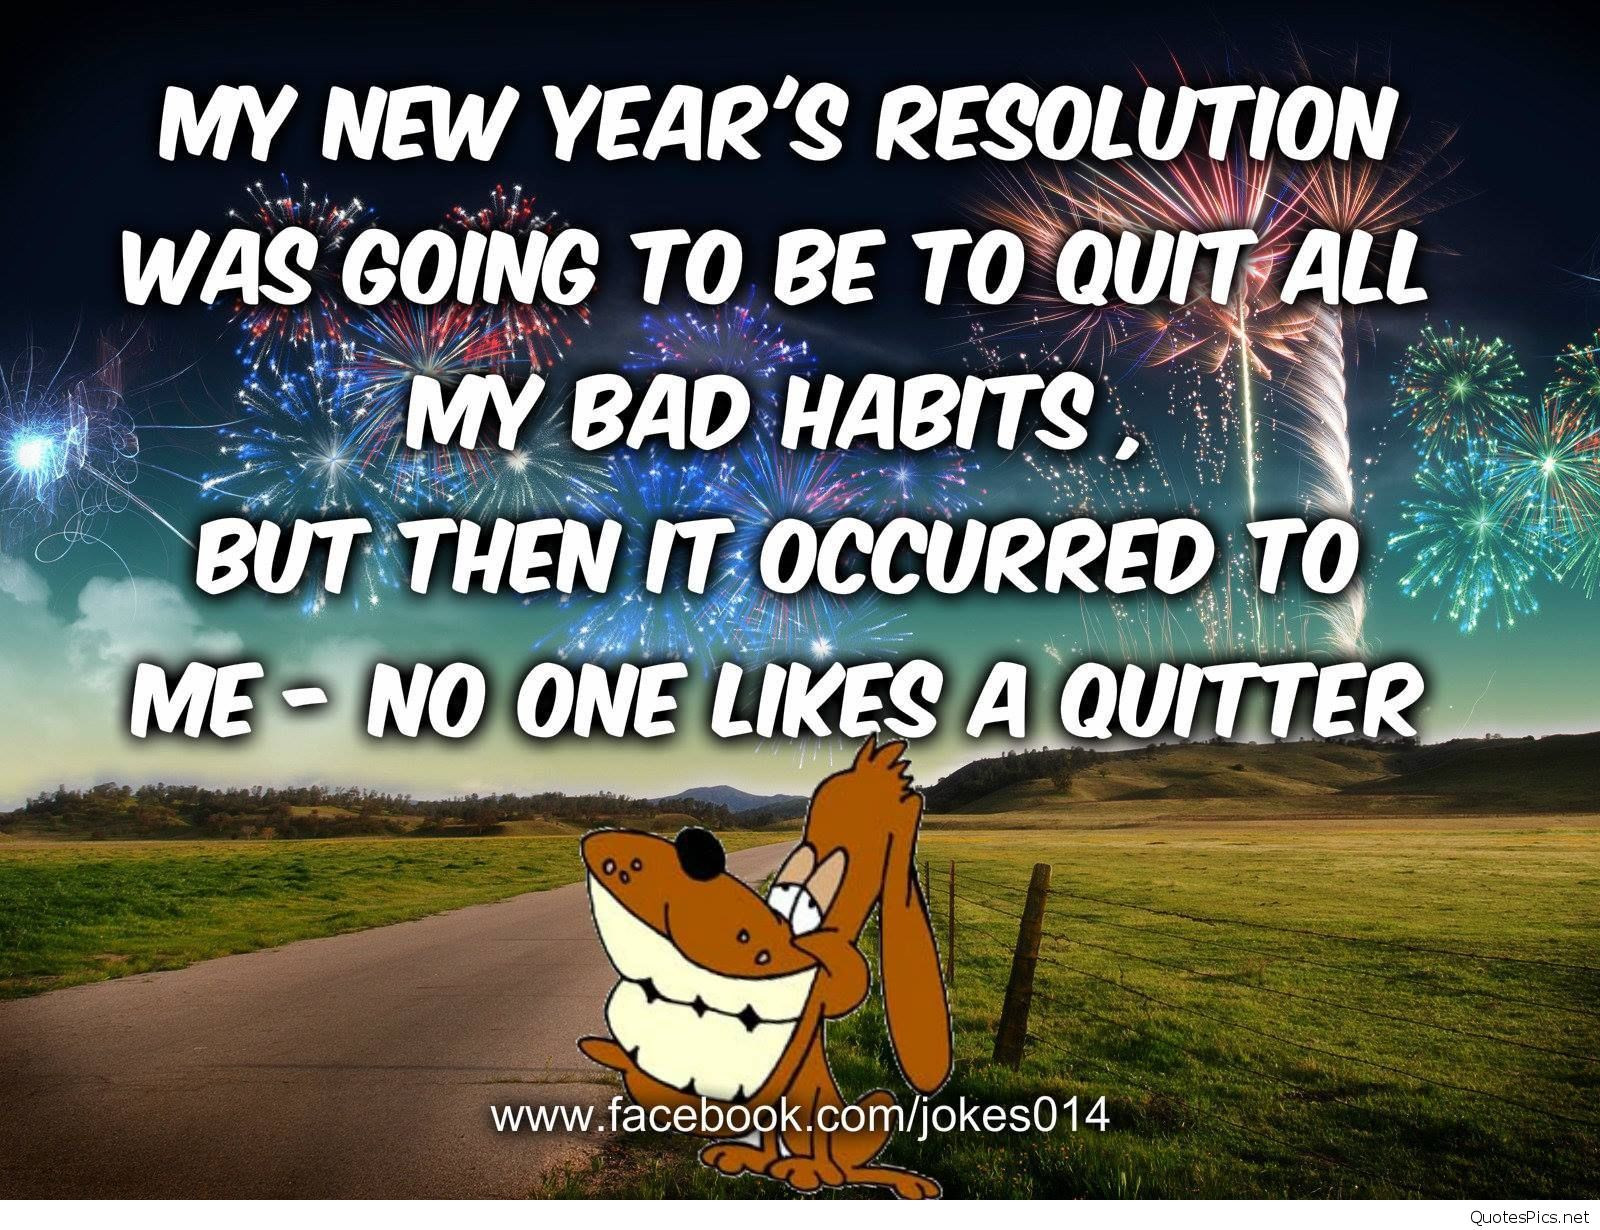 New Years Resolutions Quotes Funny
 Funny happy new year resolutions images & sayings cards 2017